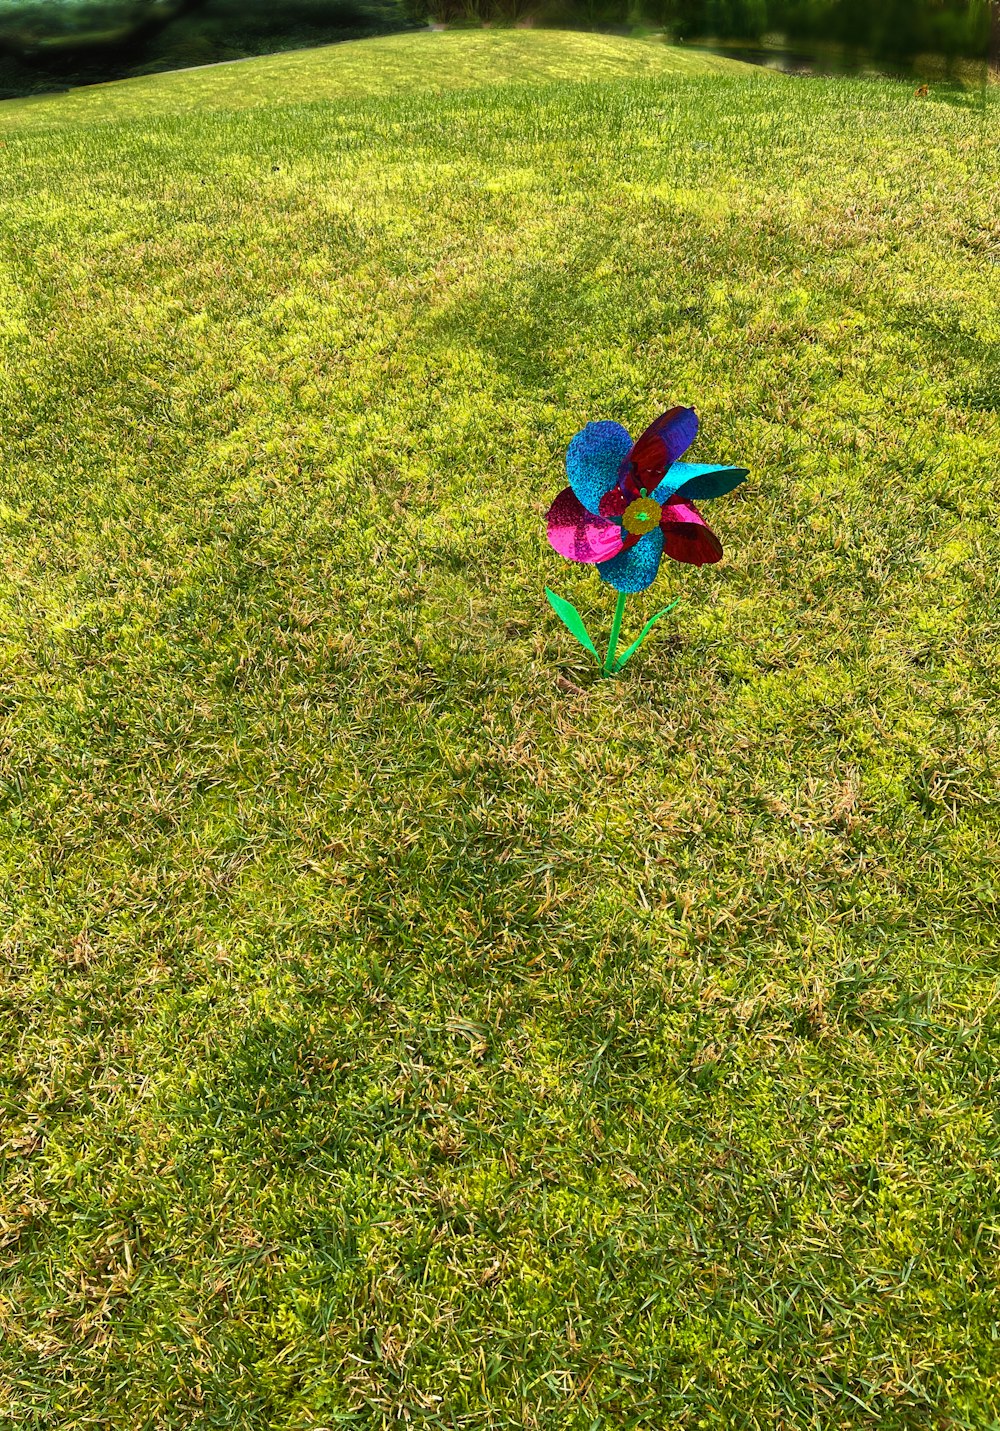 a colorful pinwheel in a grassy field